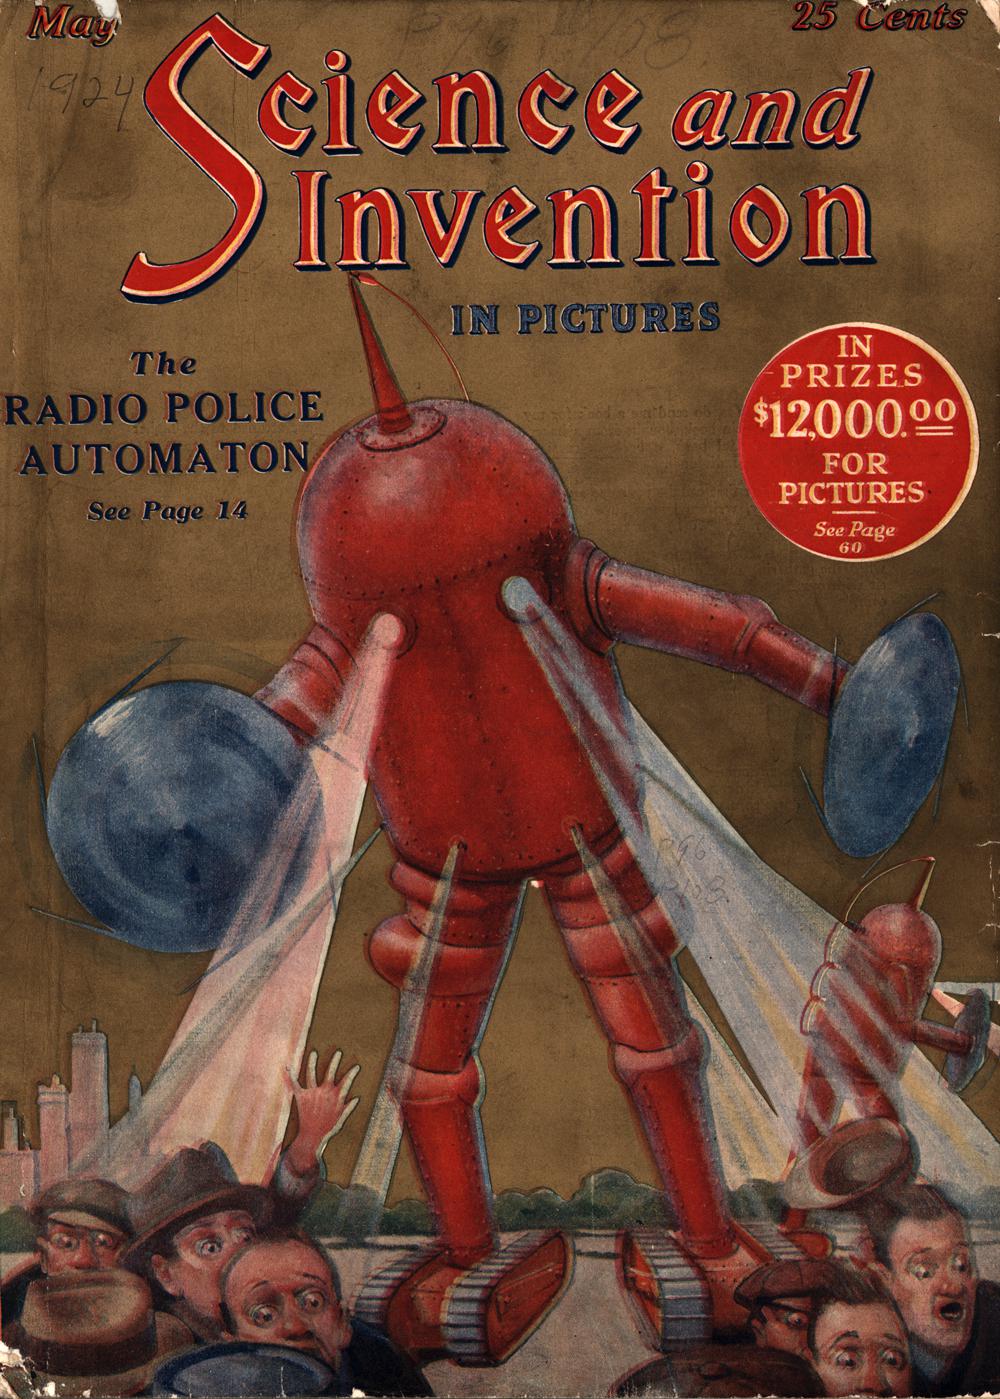 1924 - Science and invention - Vol. 12, No. 1